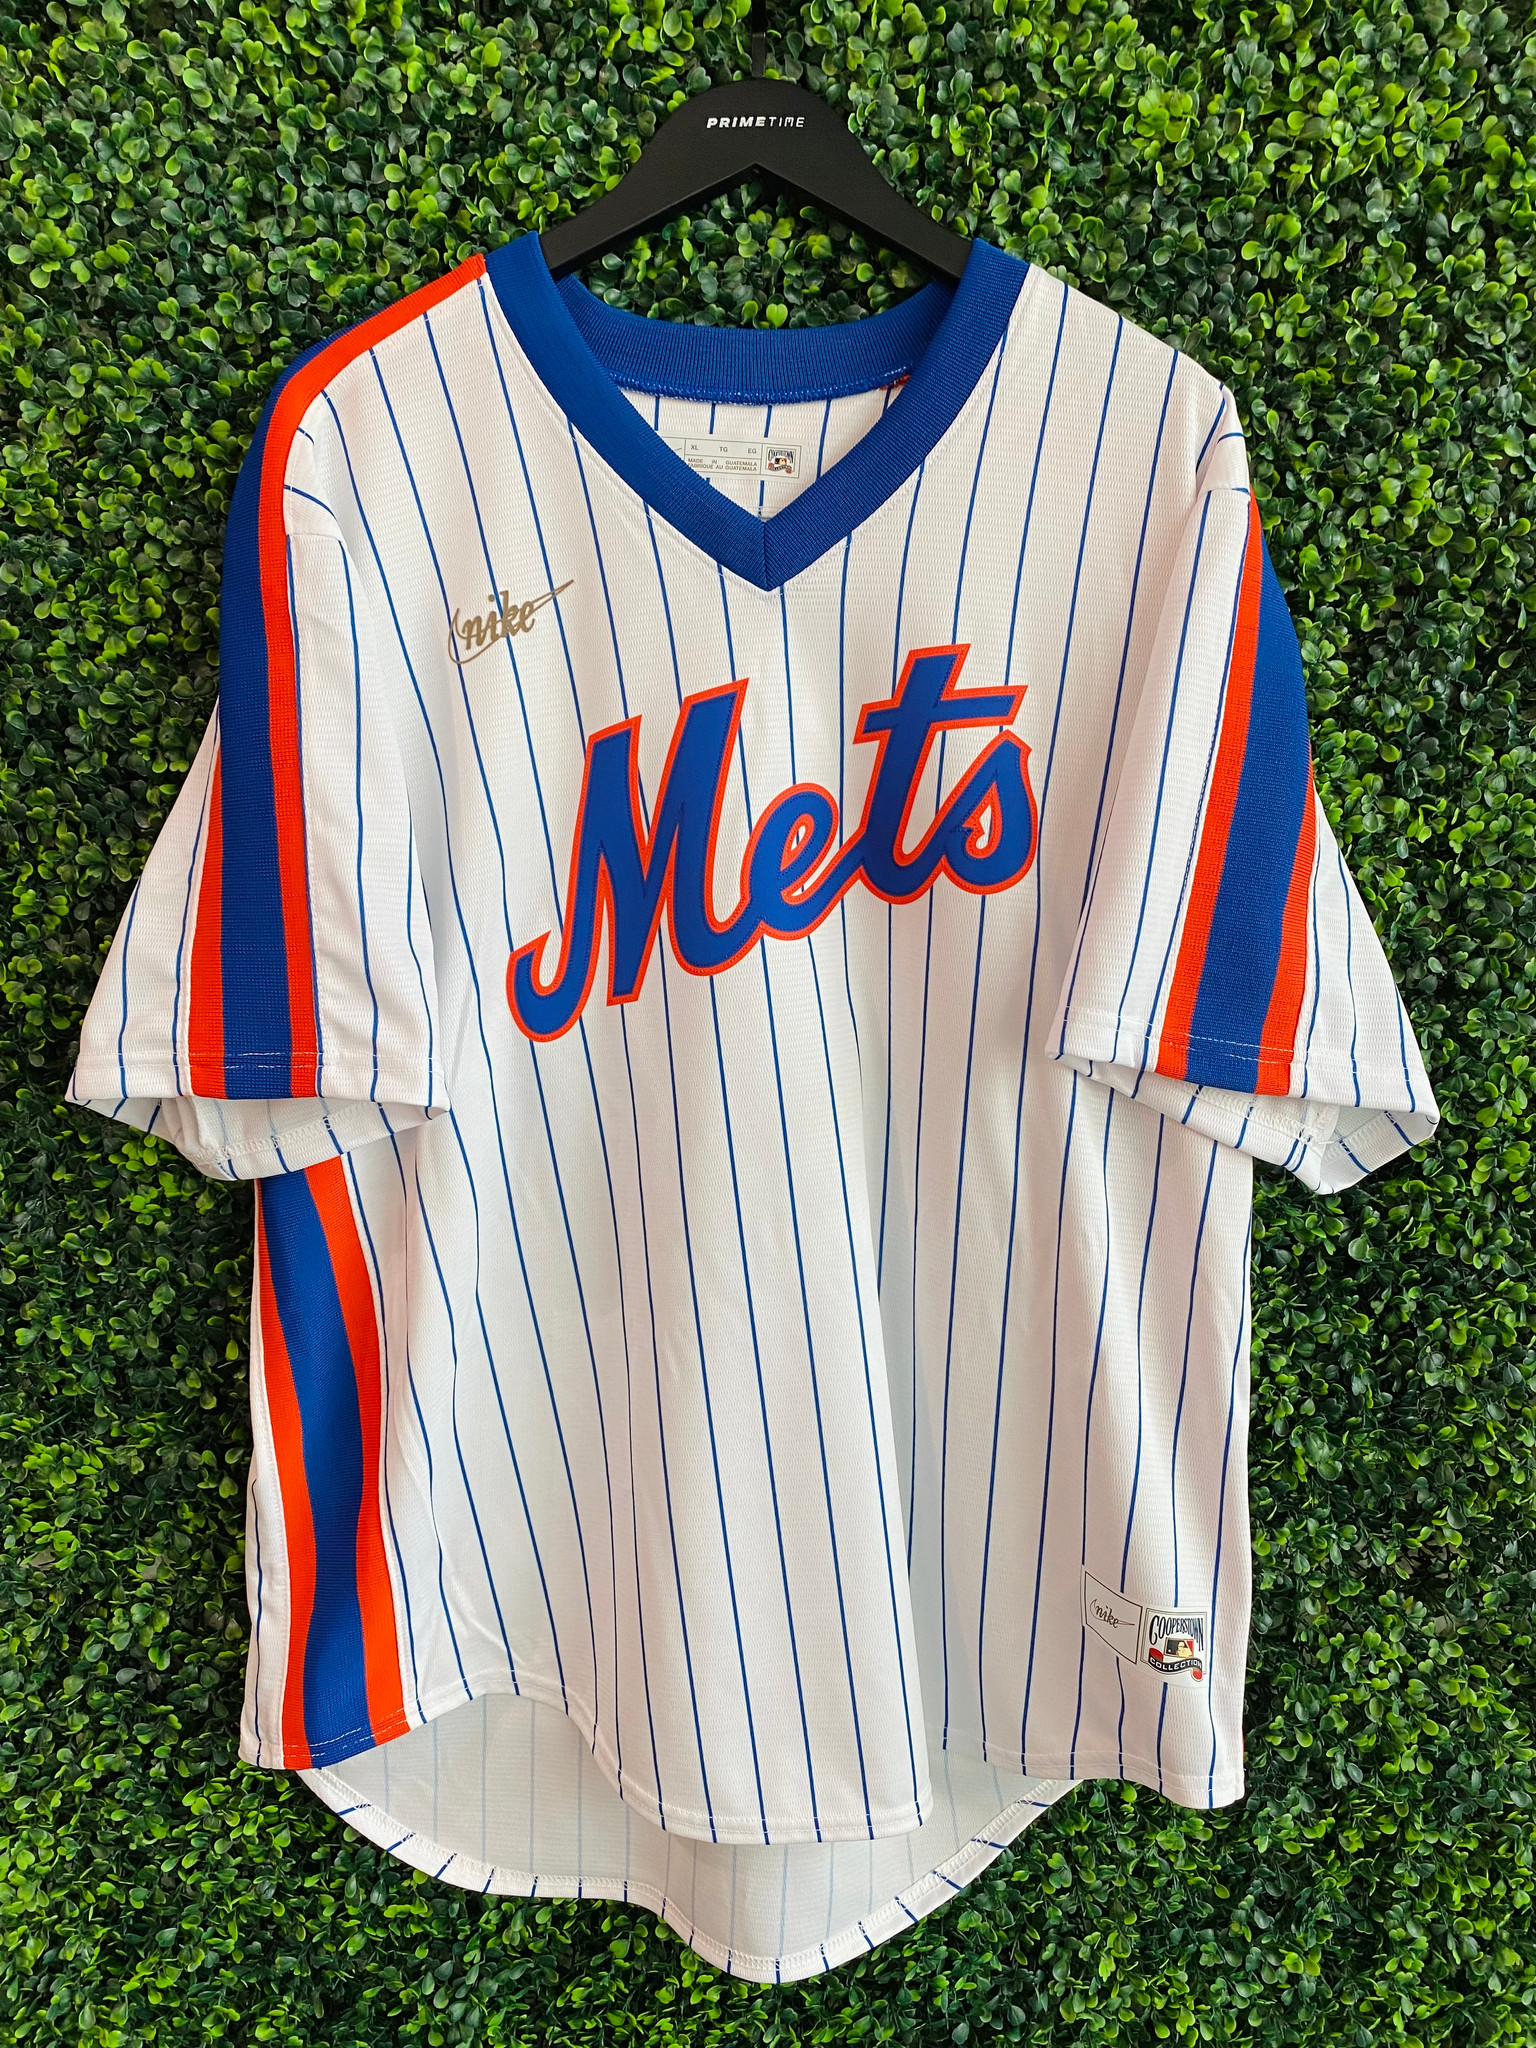 Nike Men's Nike Darryl Strawberry White New York Mets Home Cooperstown  Collection Player Jersey